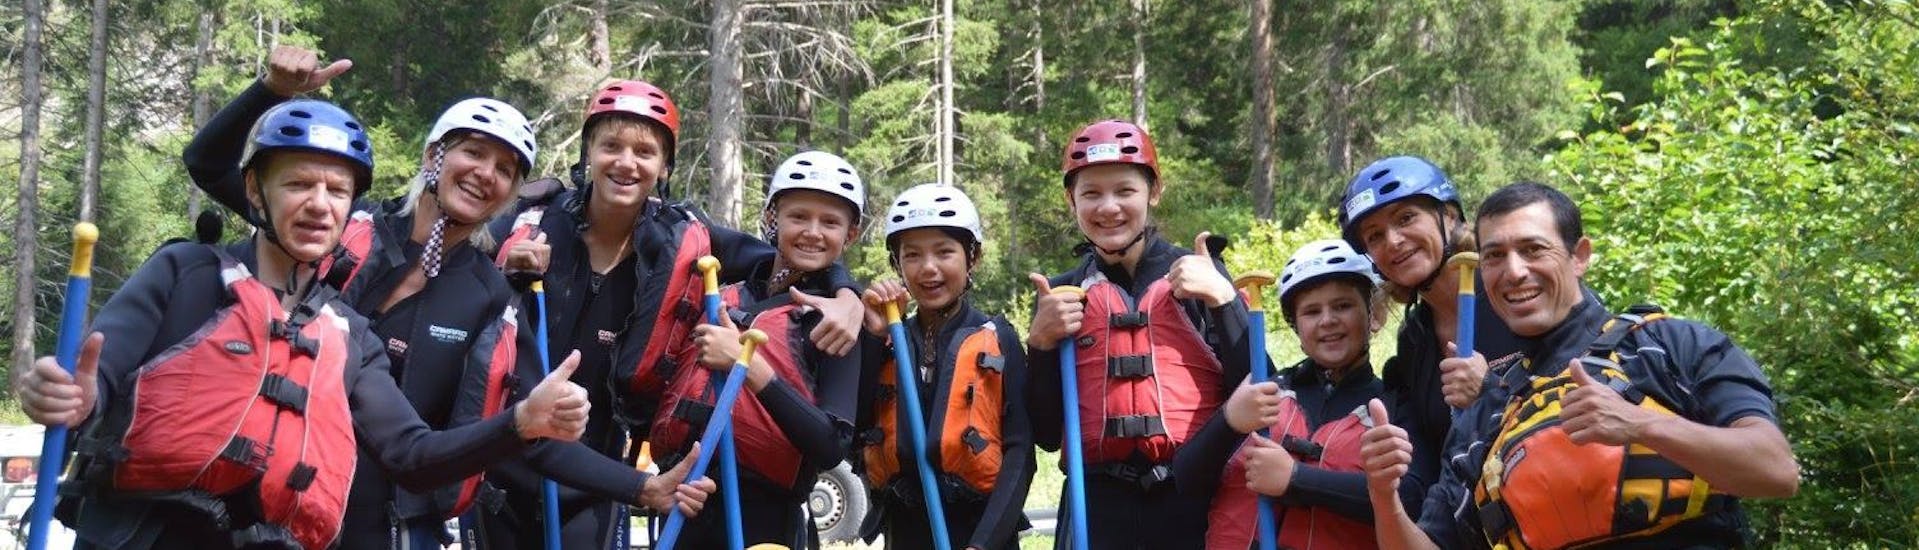 Rafting on the Inn River for Youth Groups (10+ ppl) with Engadin Adventure - Hero image